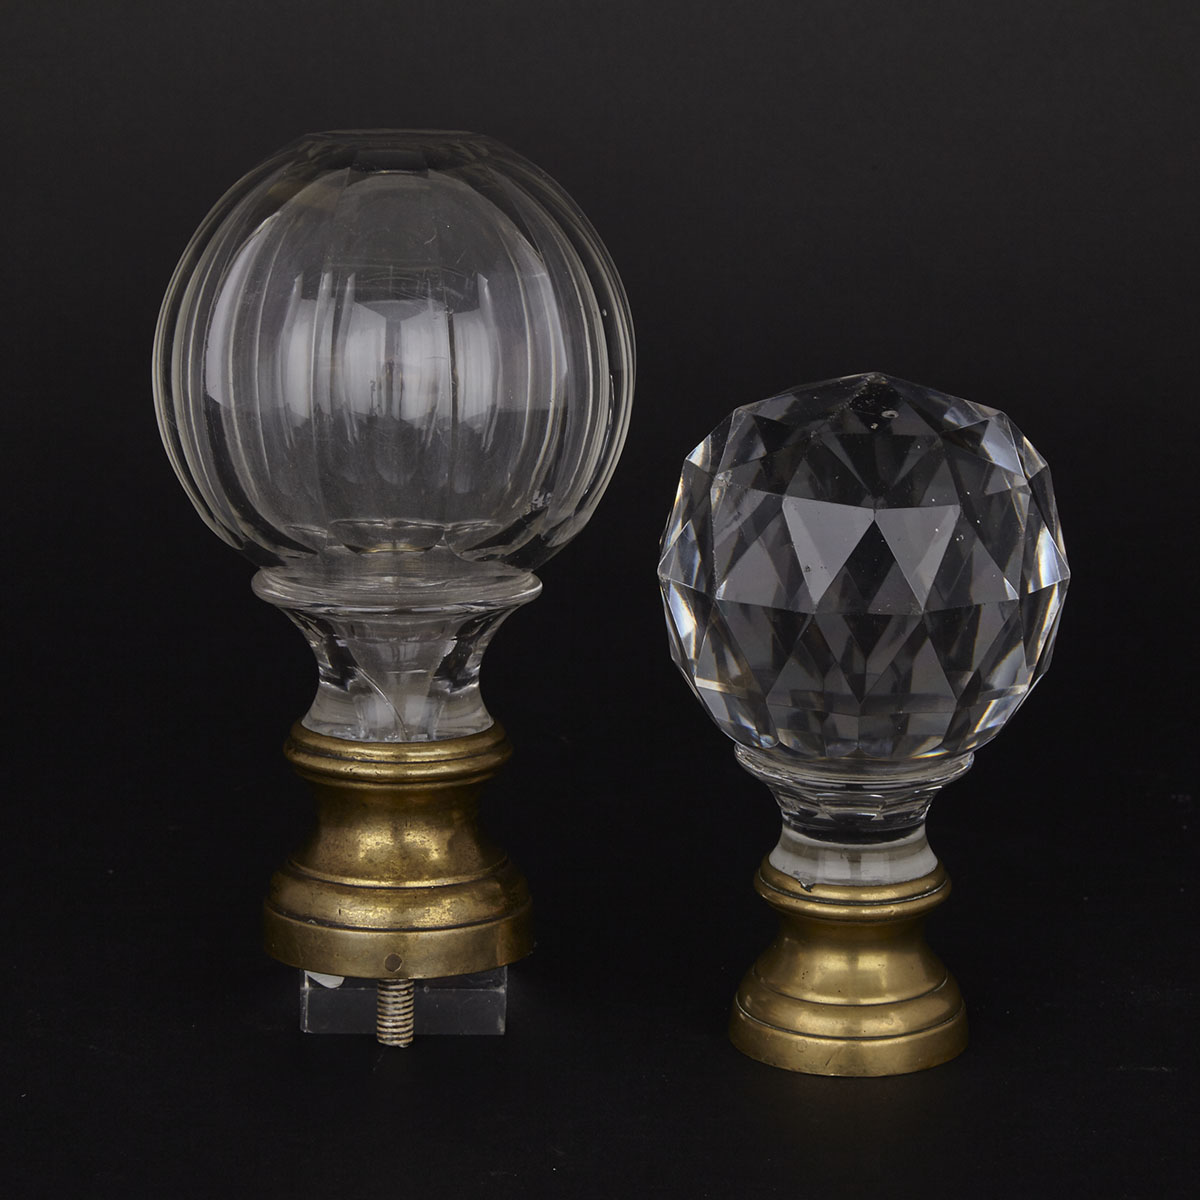 Two French Cut Clear Glass Newel Post Finial Balls, mid 19th century